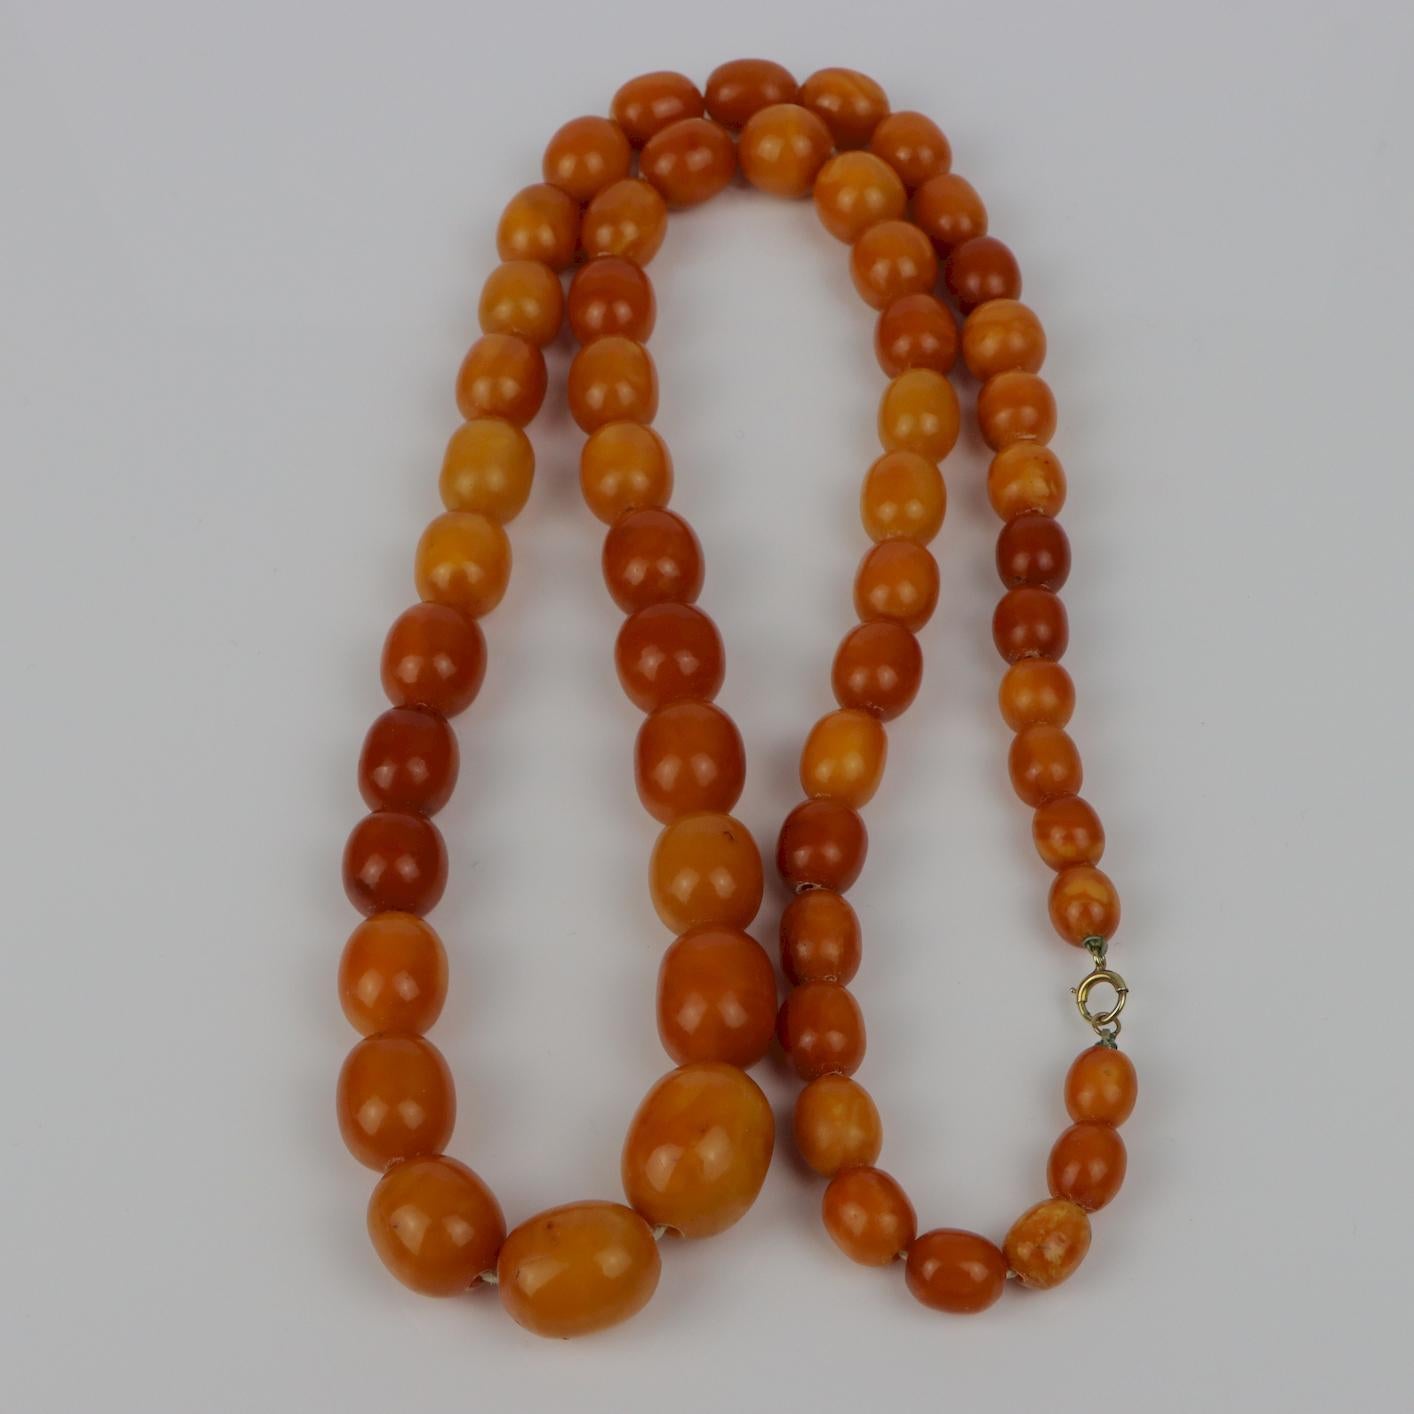 Antique 14K Gold Beeswax Amber Bead Necklace For Sale 7